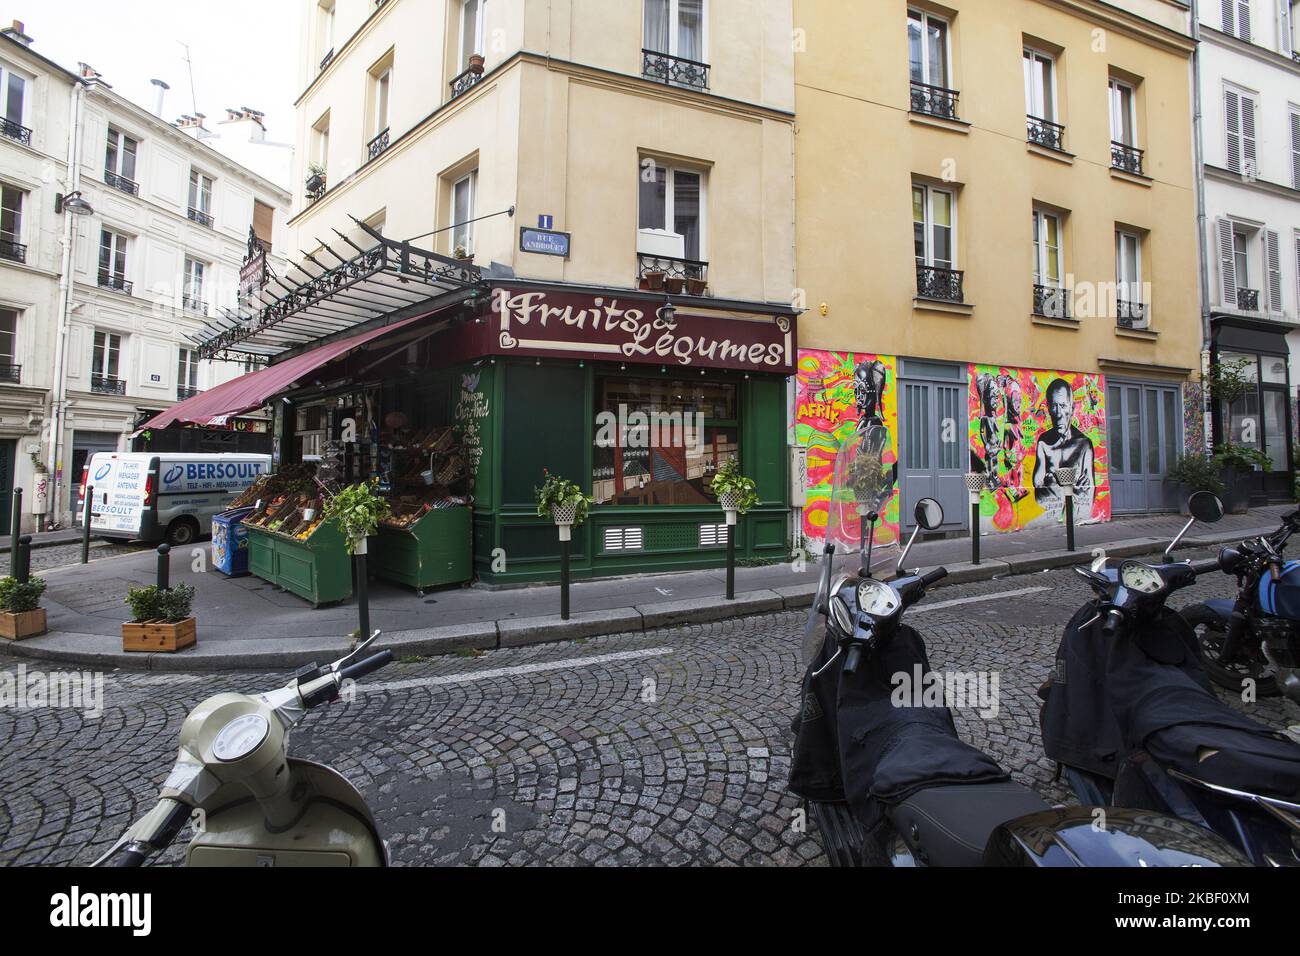 Maison Collignon 56 Rue des Trois Freres with a fruit and vegetable market at the Montmartre, Paris, France on 13 September 2019. The store The Marche de la Butte has become famous thanks to the movie Amelie from Montmartre. Many scenes of the film were shot at this location. A graffiti with Pablo Picasso pictured on the right. (Photo by Krystof Kriz/NurPhoto) Stock Photo